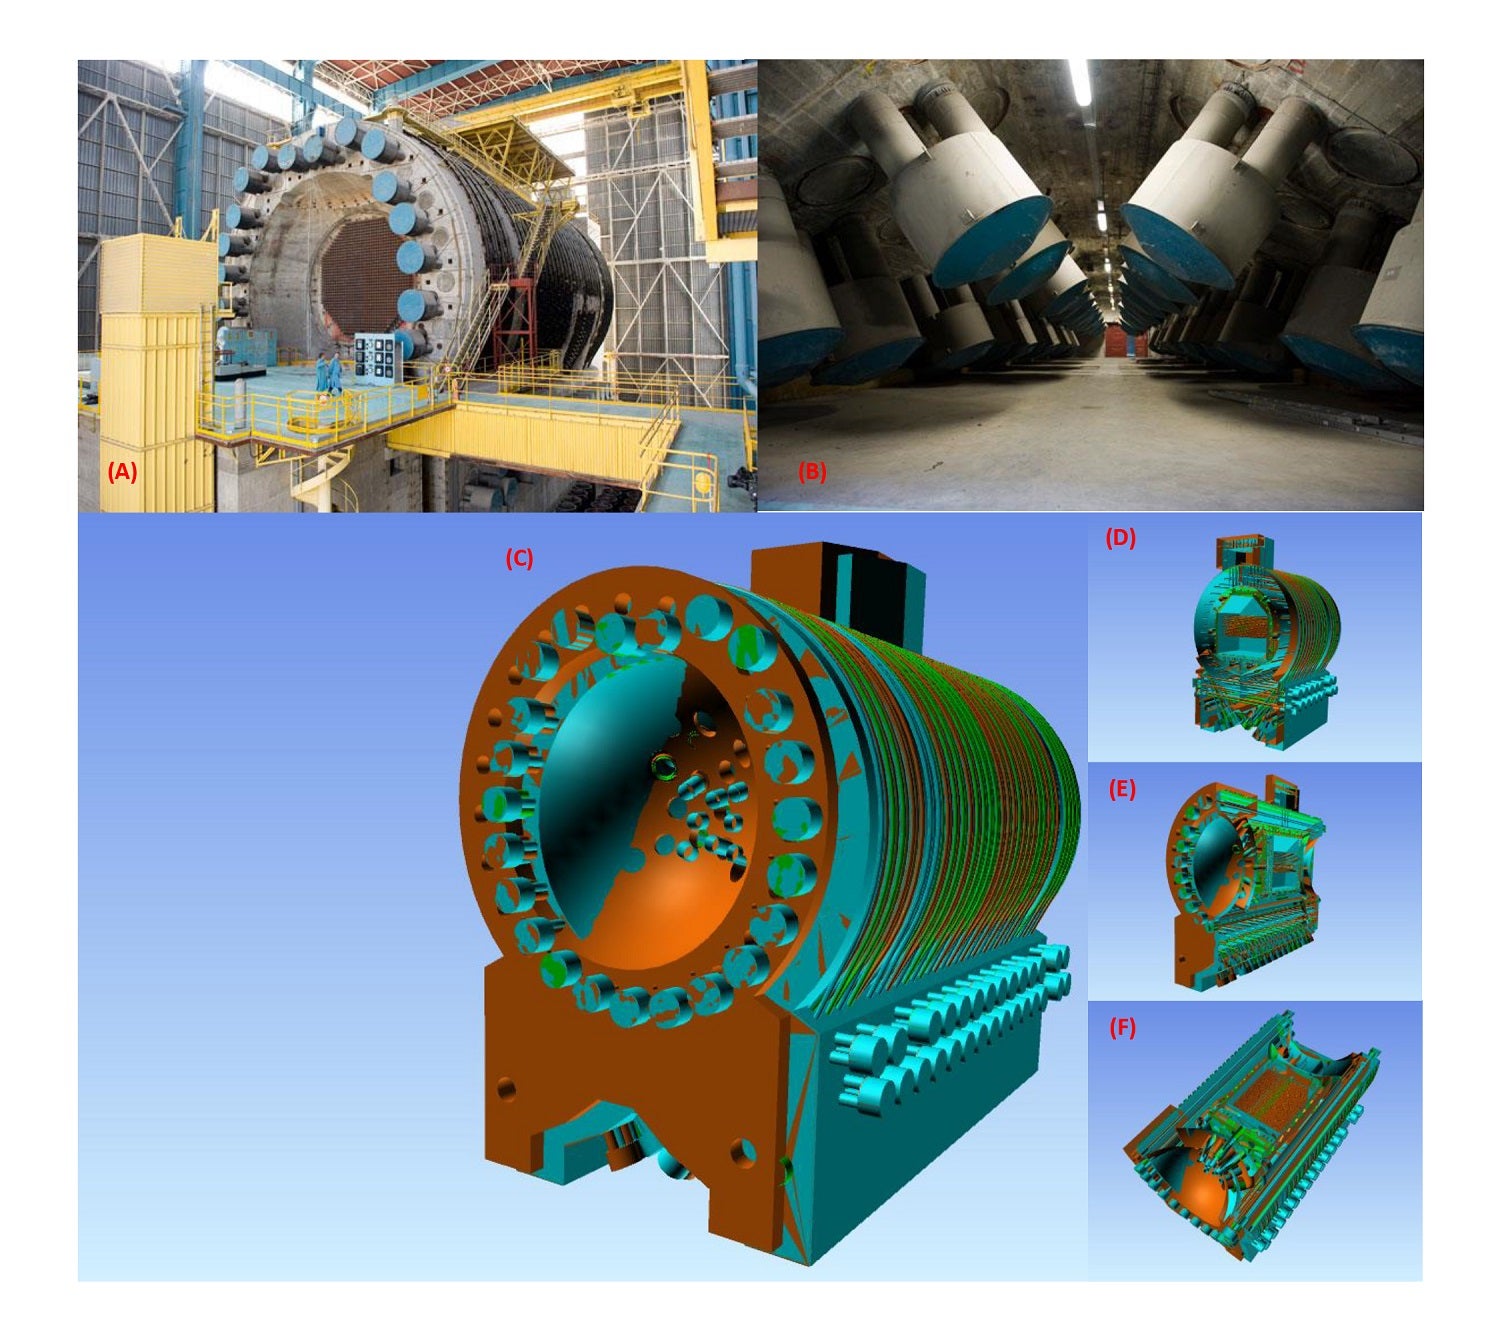 Muon detectors around G2 nuclear reactor in France. Two facility photos and four diagrams.